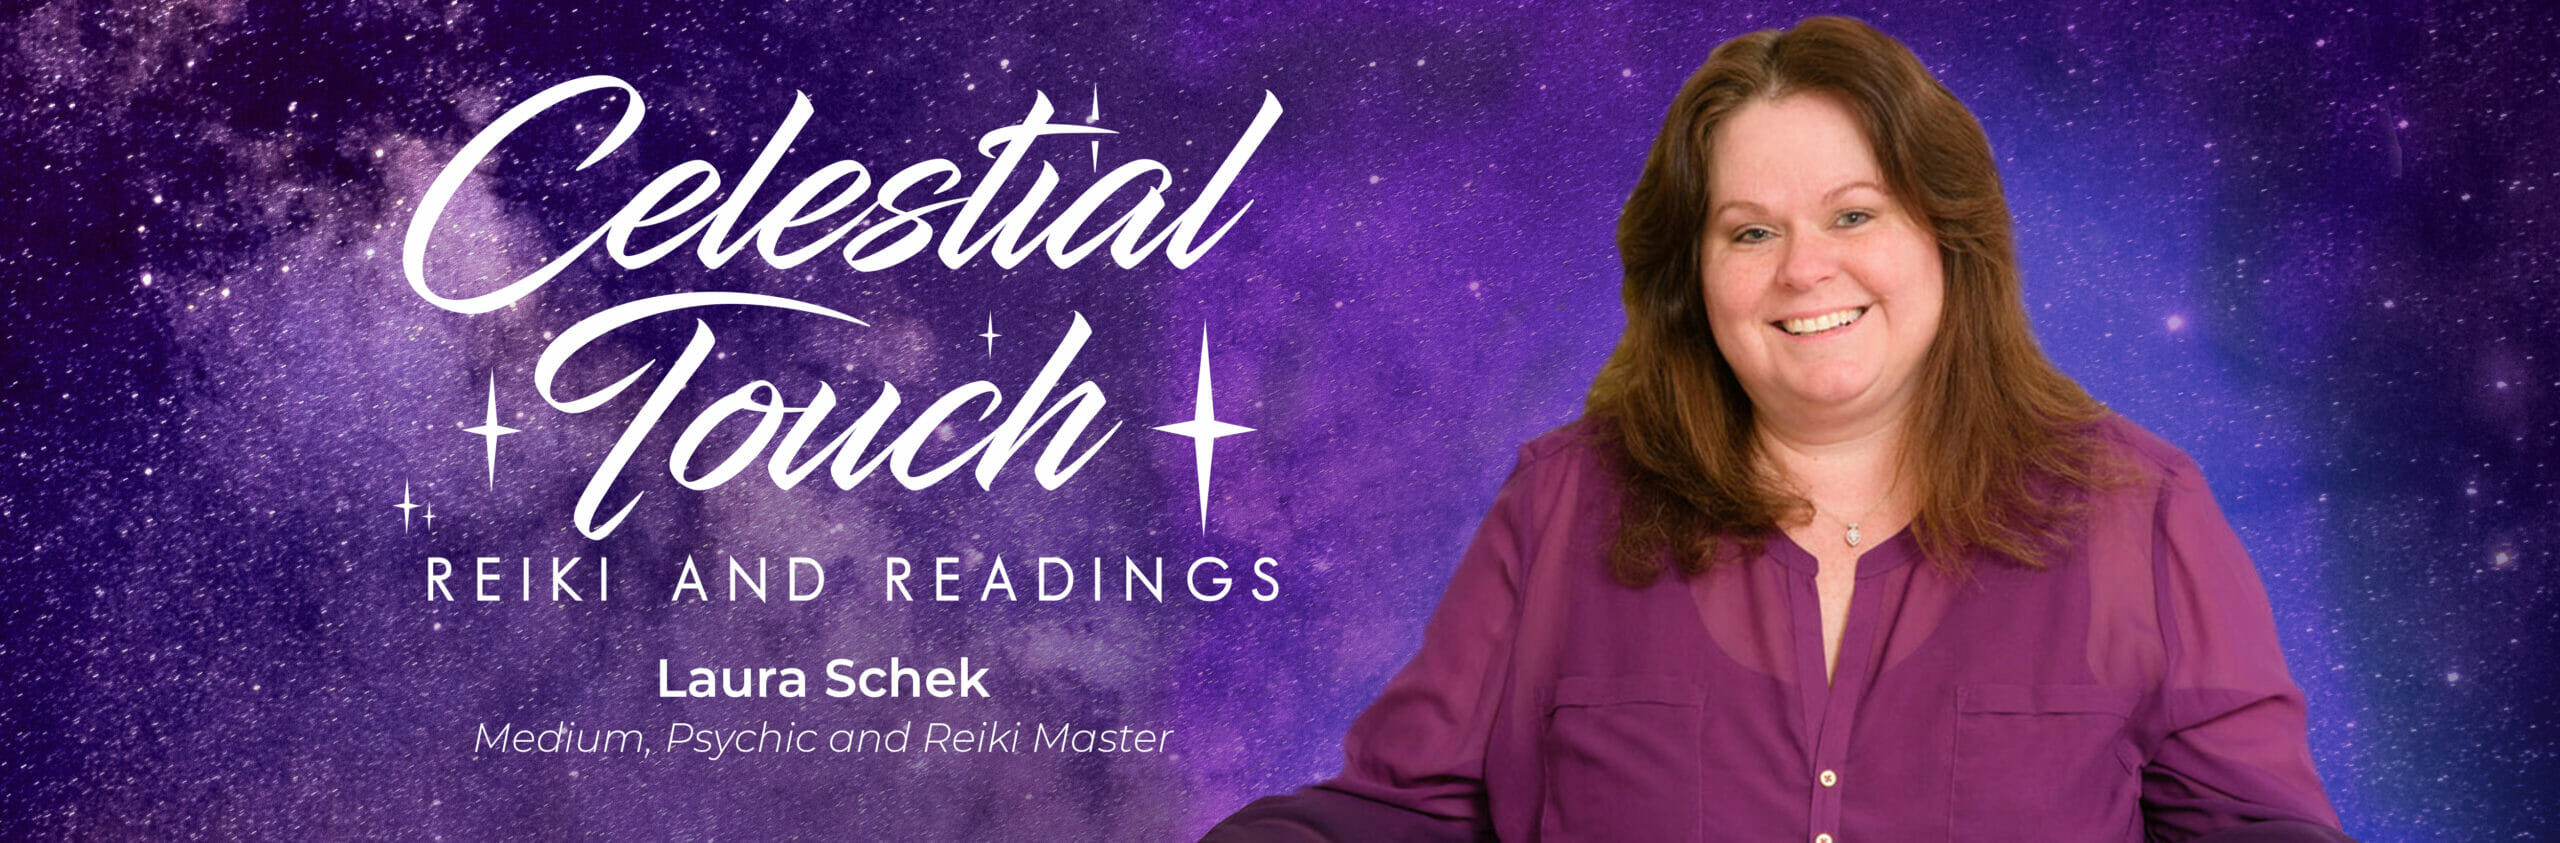 Celestial Touch Reiki and Readings